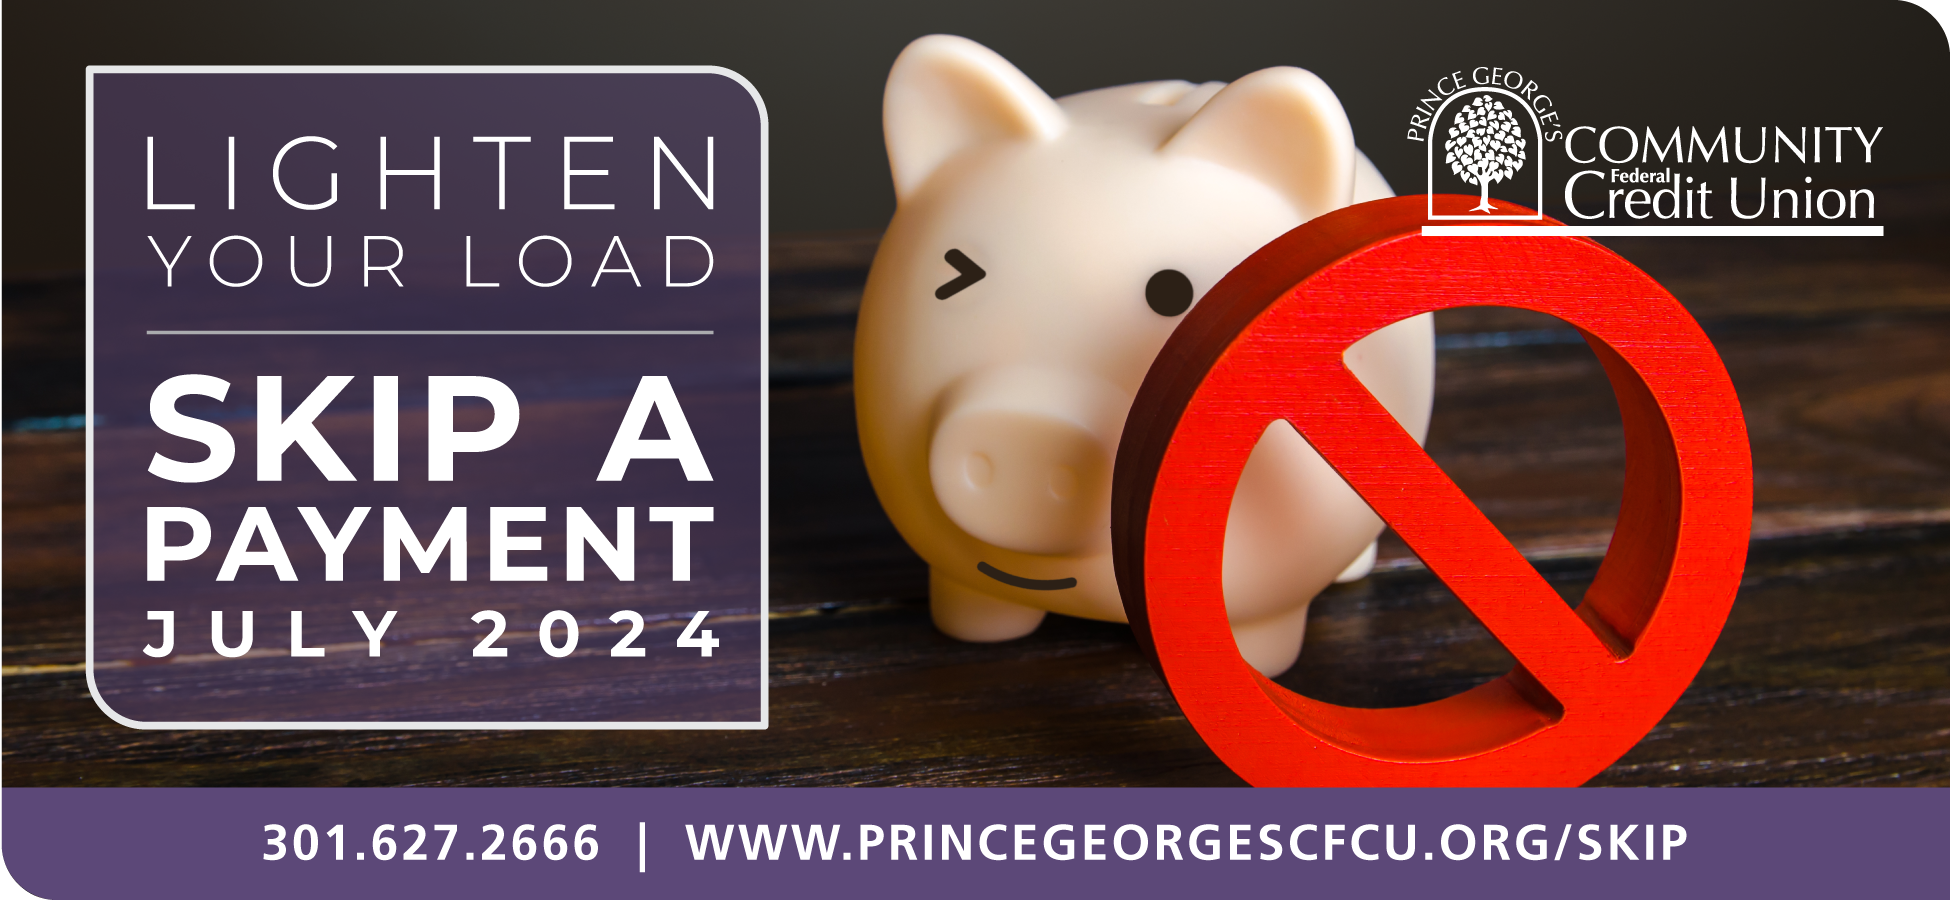 July 2024 skip a payment program. A piggy bank with a cancel sign over it.